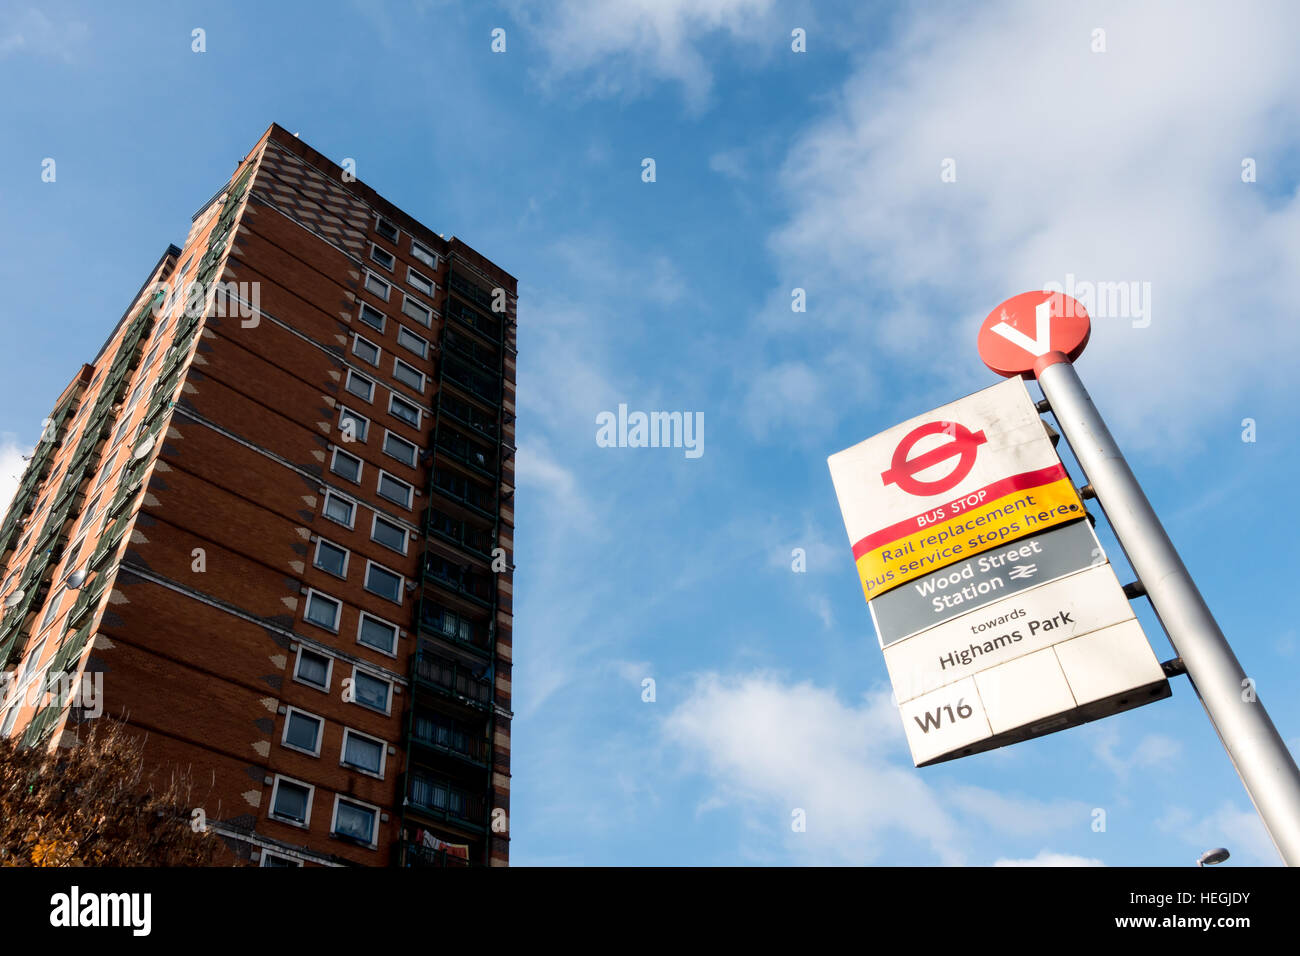 Bus Stop V at Wood Steet Station in Waltham Forest, East London, with rail replacement bus service sign, and tower block of flats or apartments. Stock Photo